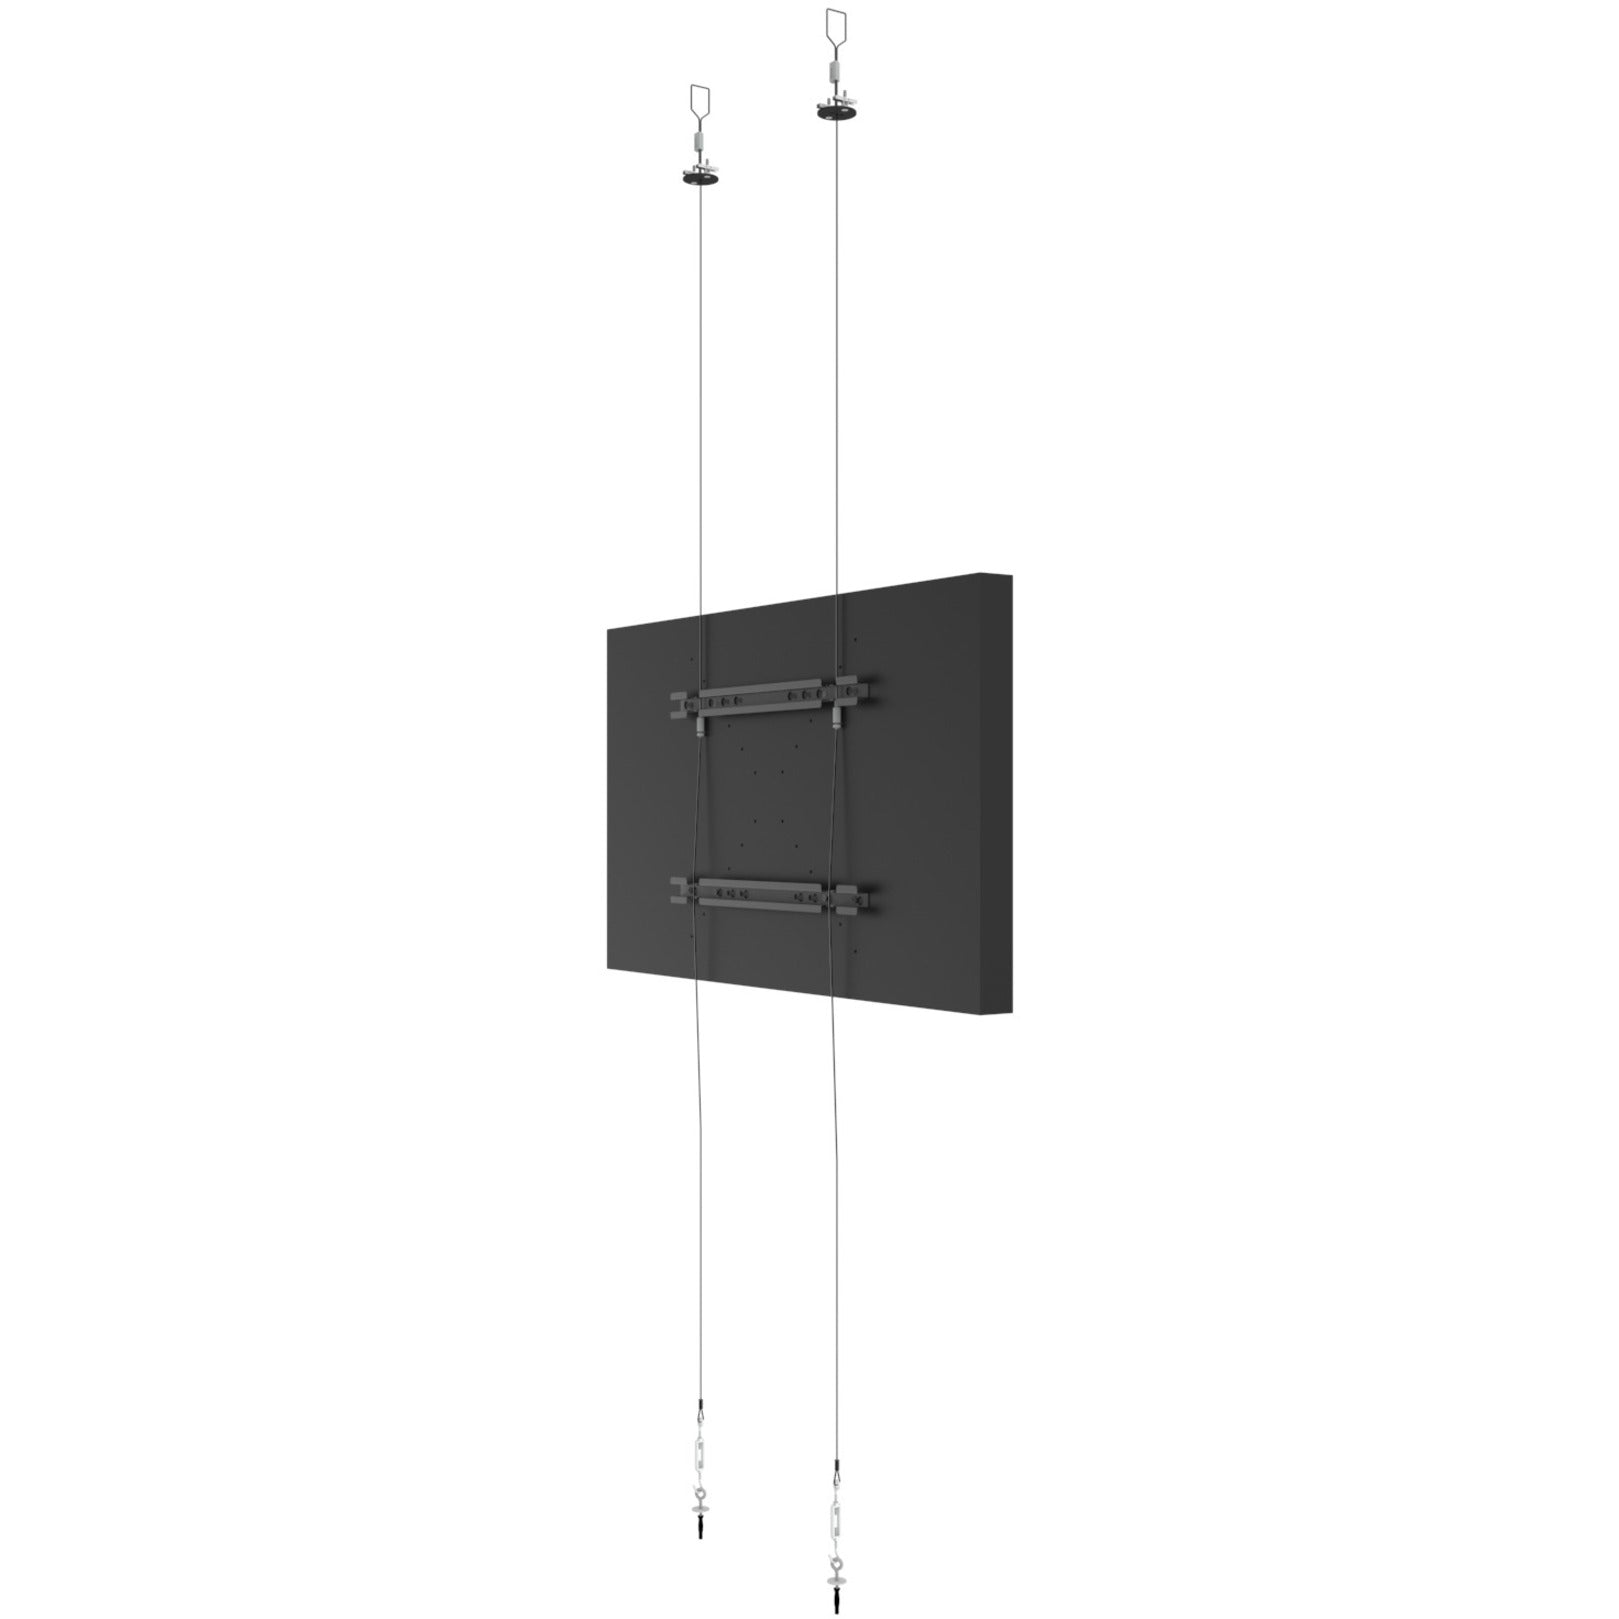 Peerless-AV DSF265L Landscape Floor to Ceiling Cable Mount for 46" to 65" Displays, Silver